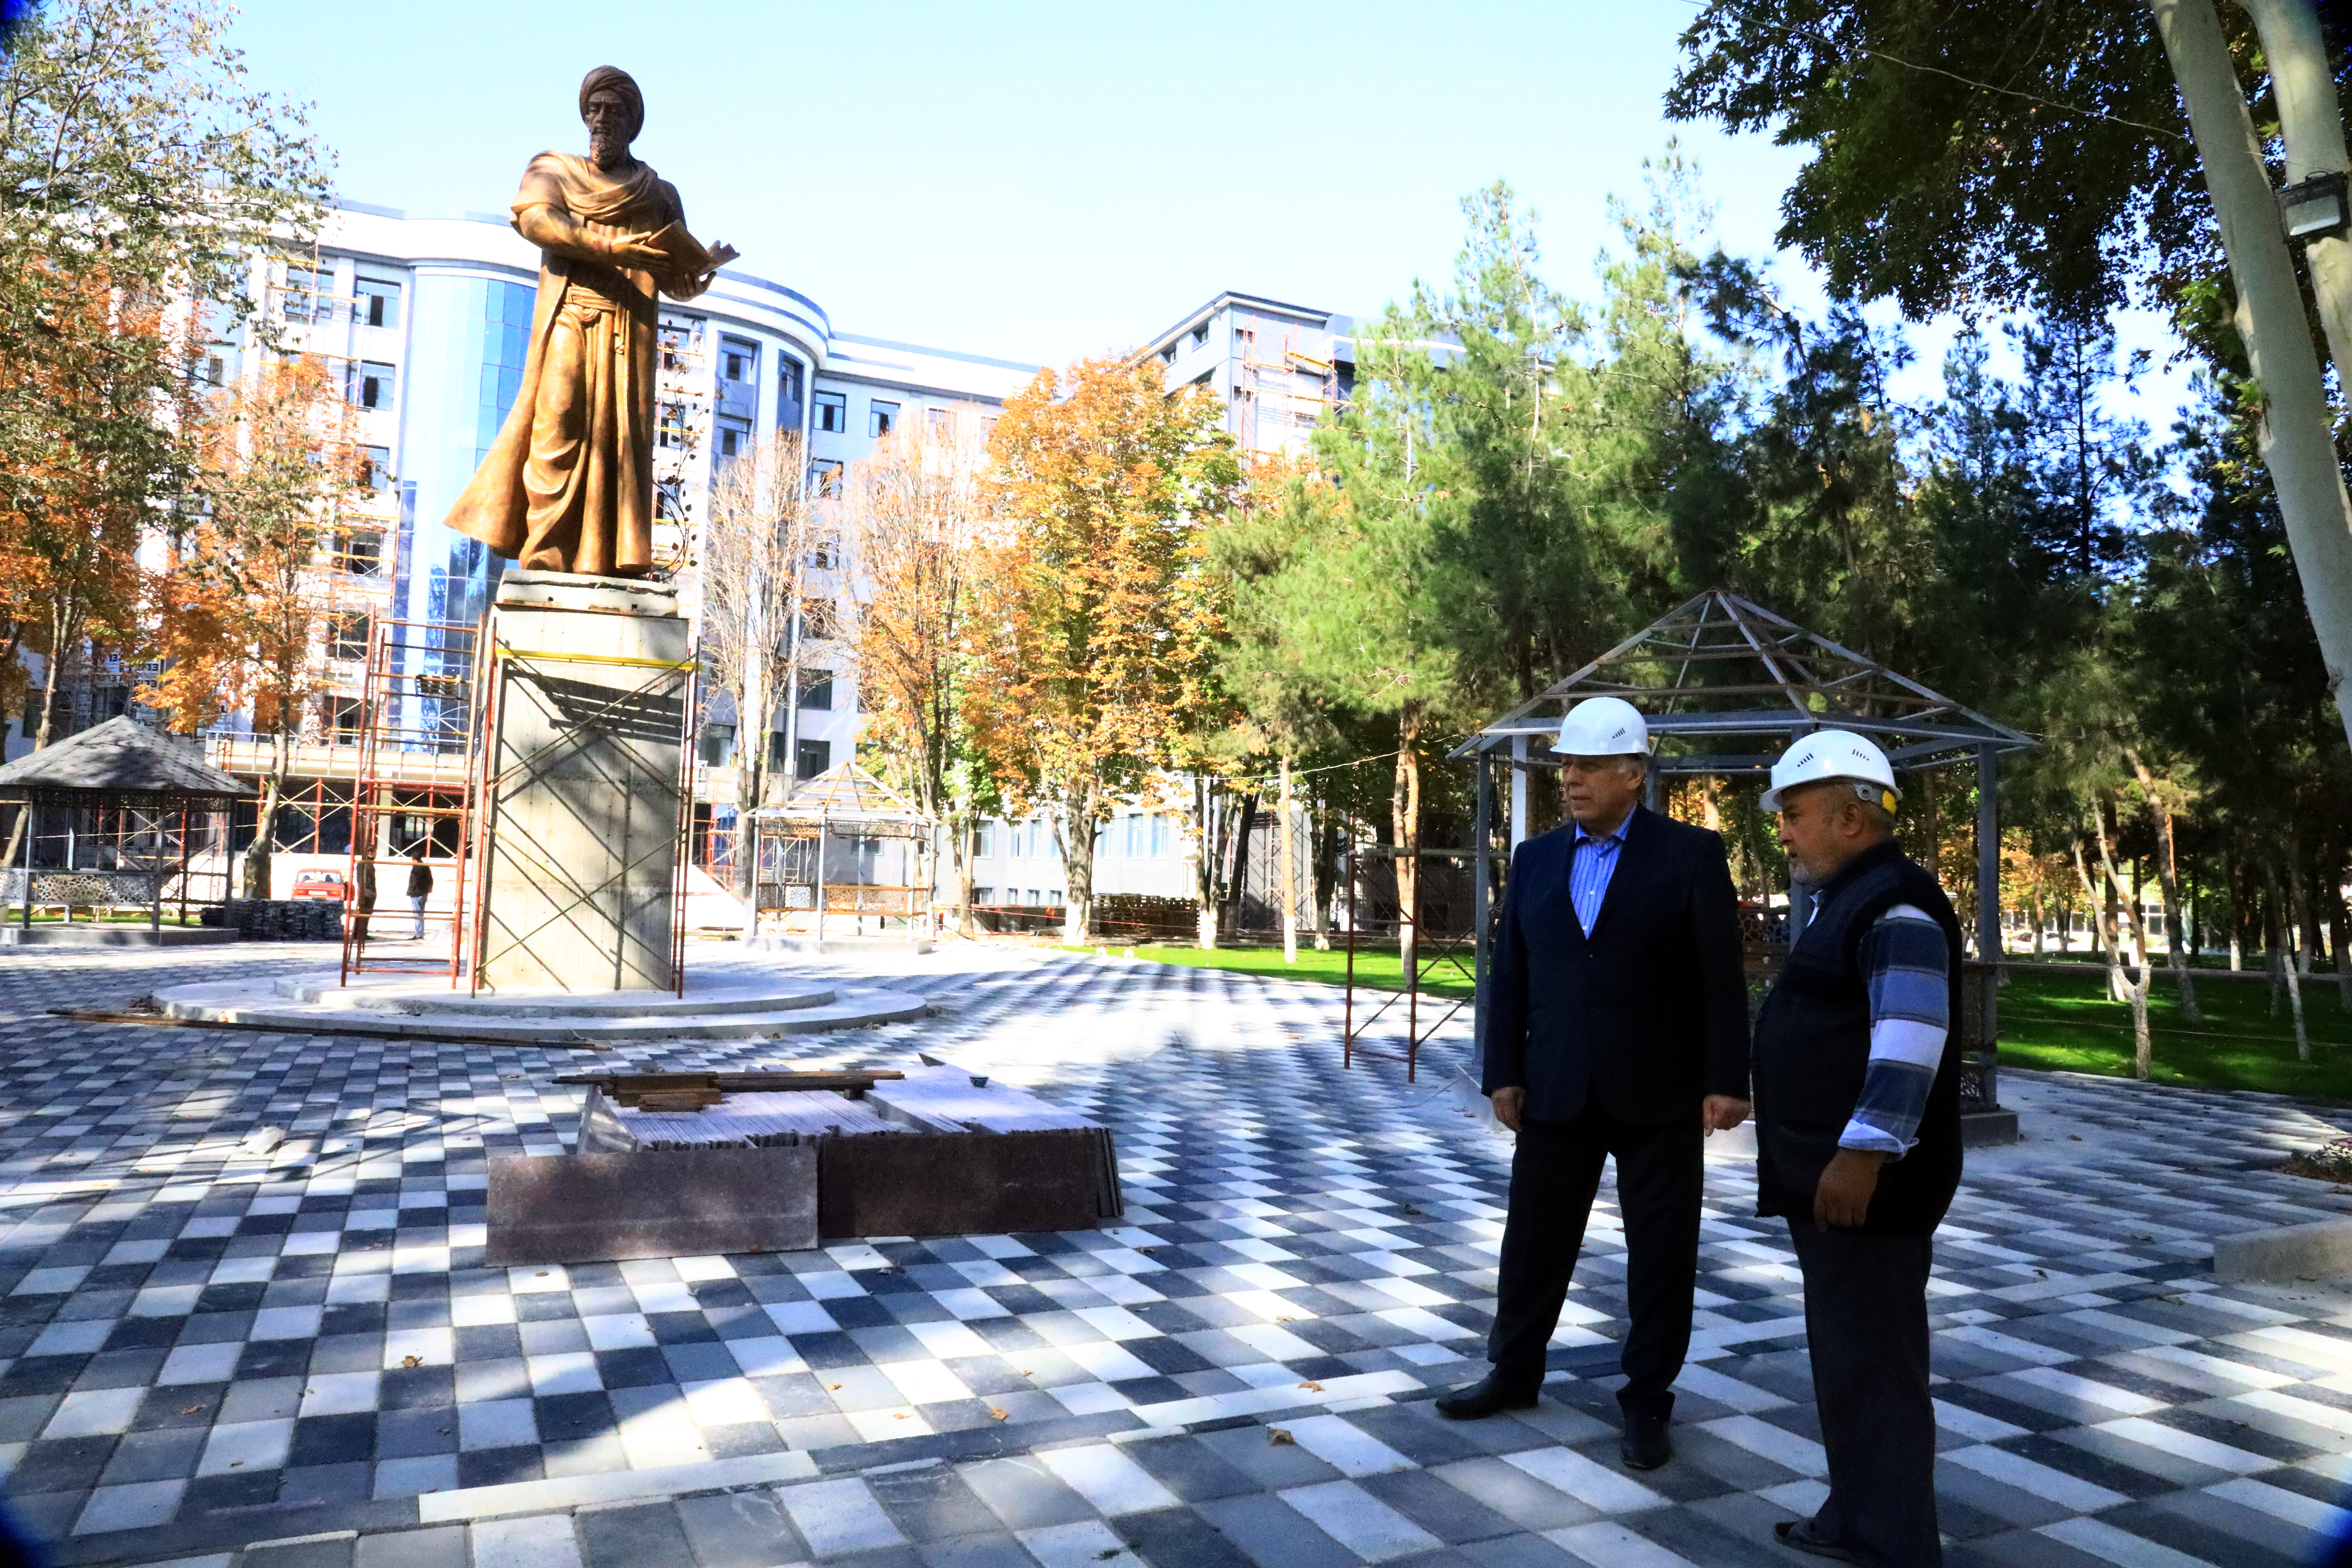 THE RECTOR OF THE INSTITUTE OBSERVED THE CONSTRUCTION PROCESSES